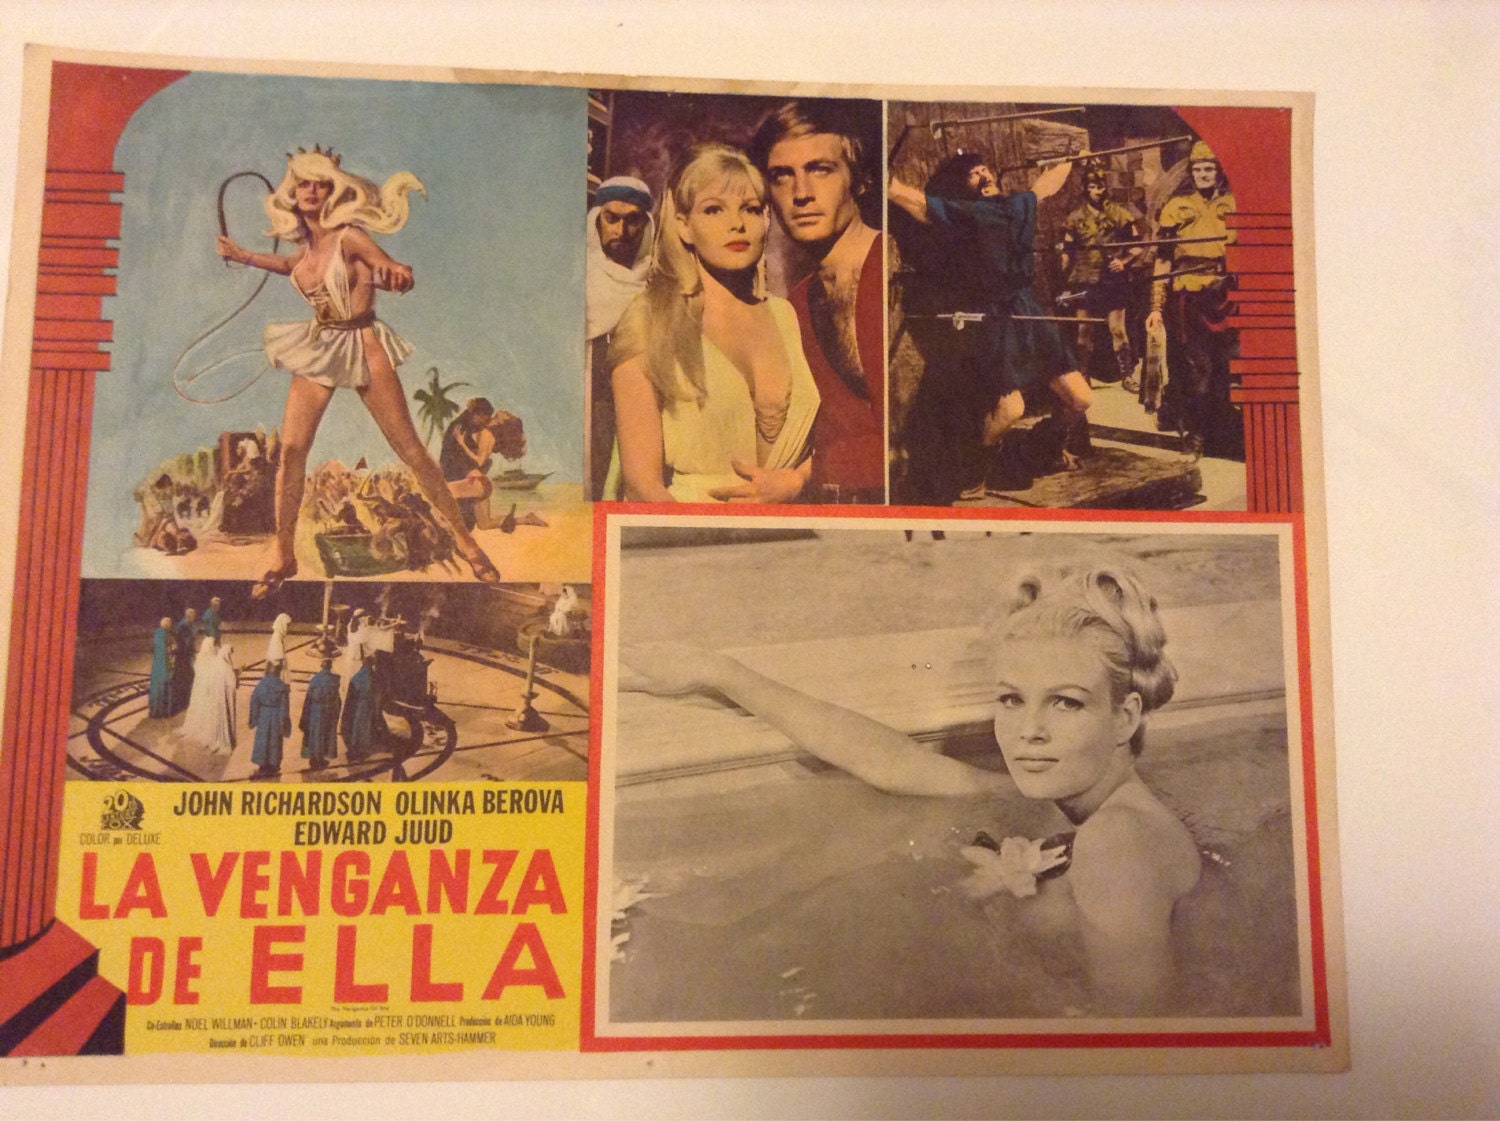 Vintage Original Movie Mini Poster for The Vengeance of She from 1968